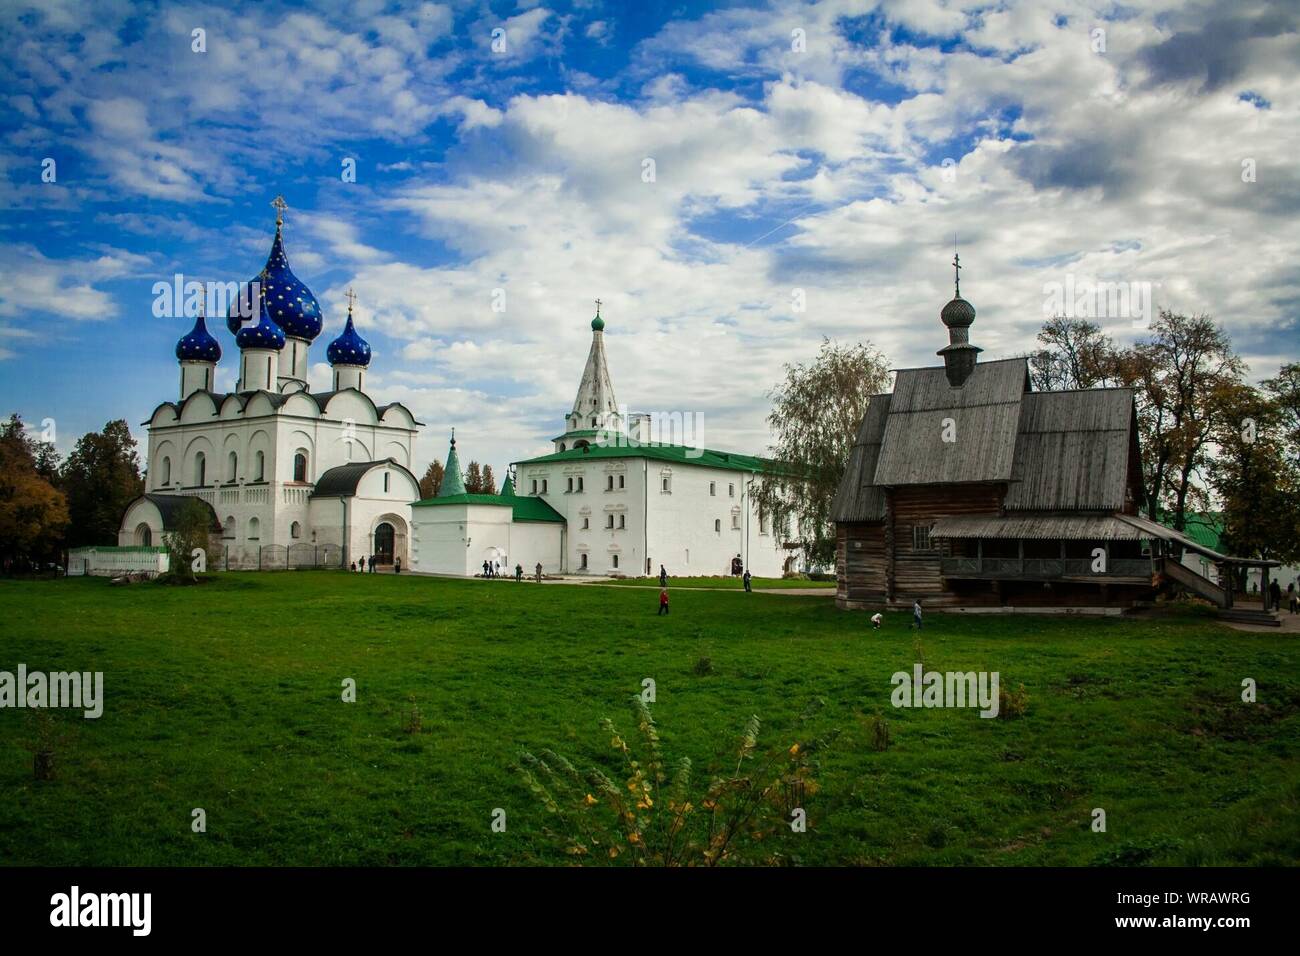 Exterior Of Russian Church Against Cloudy Sky Stock Photo